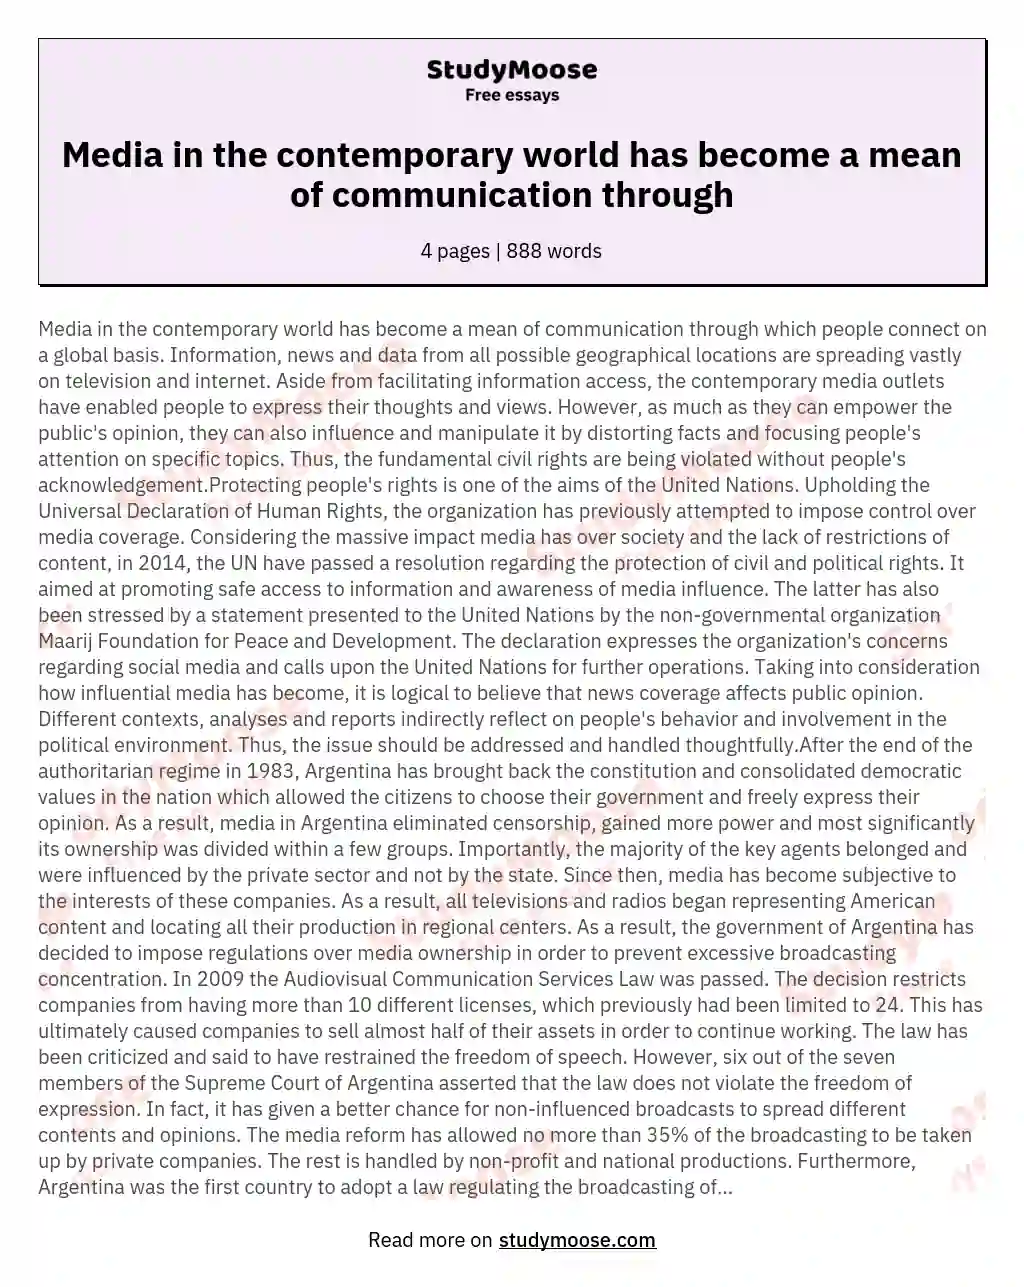 Media in the contemporary world has become a mean of communication through essay